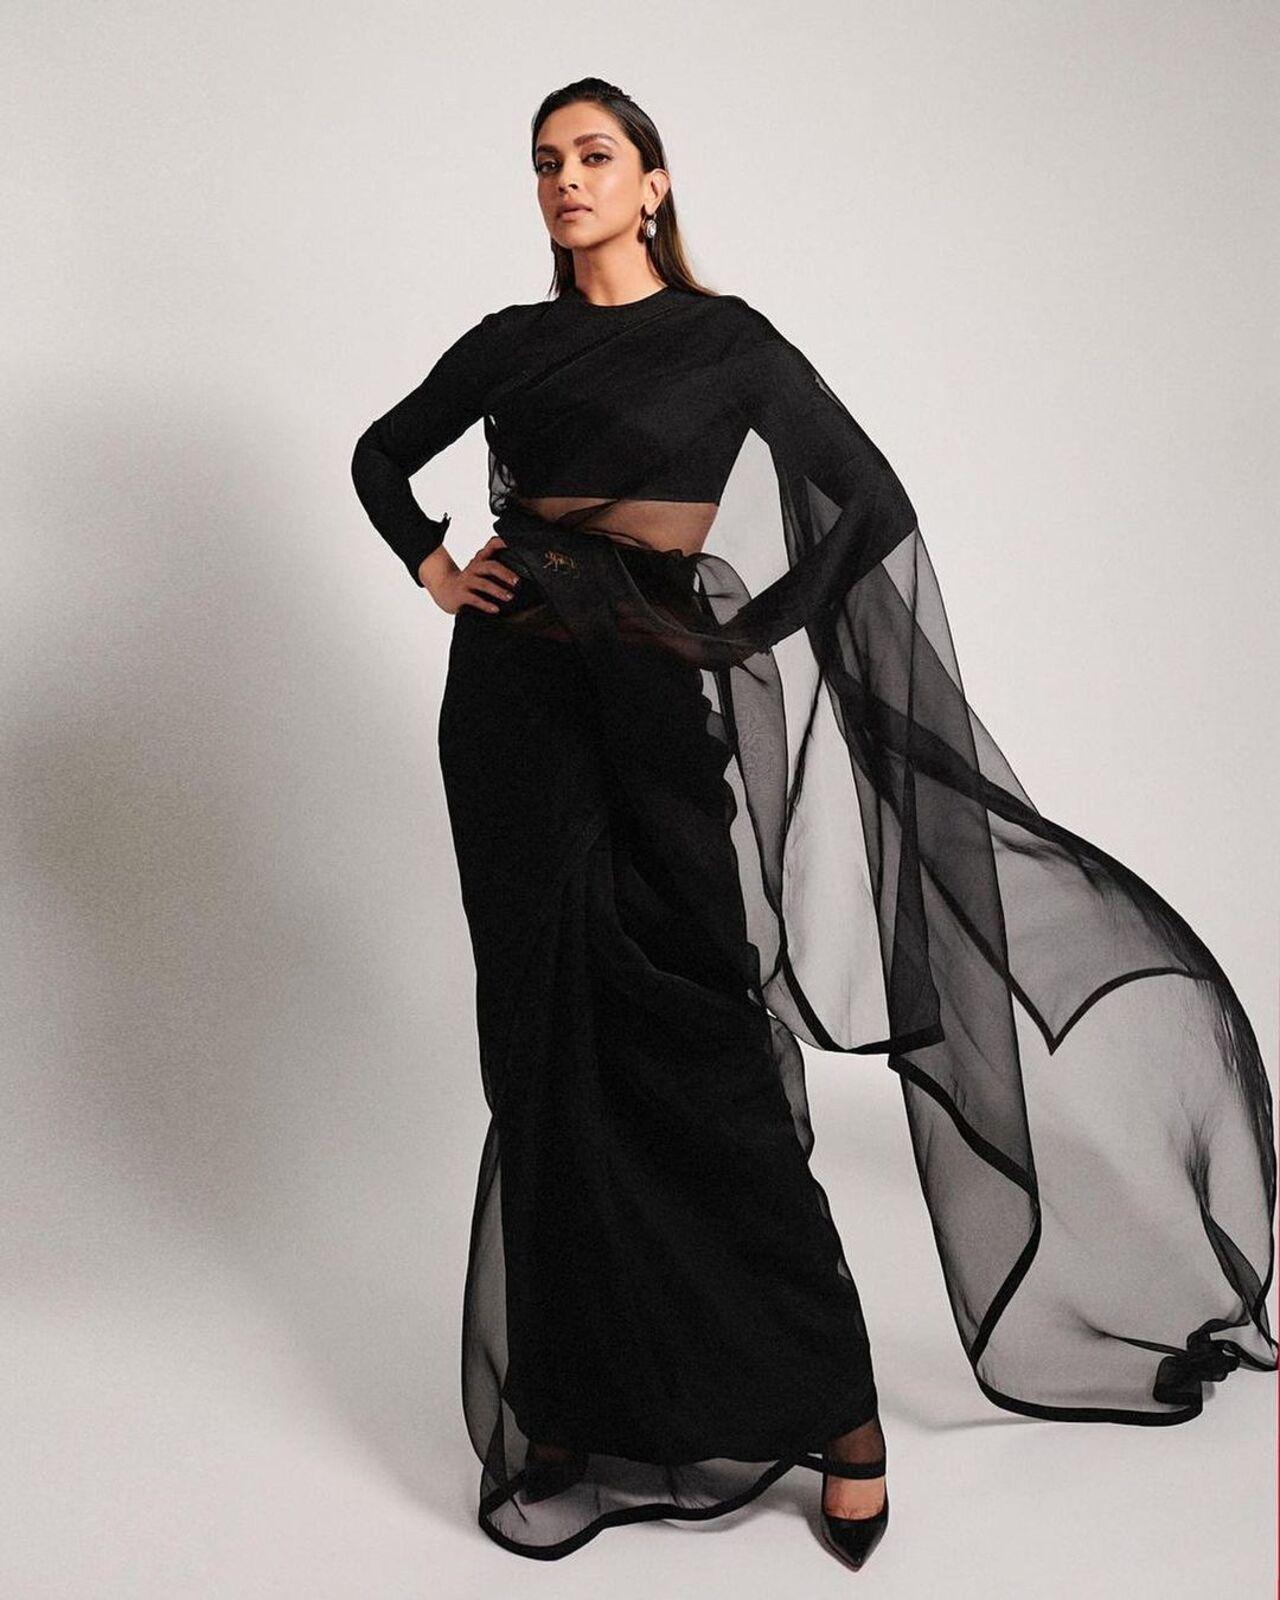 Deepika knows how to leave you awestruck with the simplest of saree looks. She opted for this black sheer net saree for a media interaction where she spoke about her career in the movies